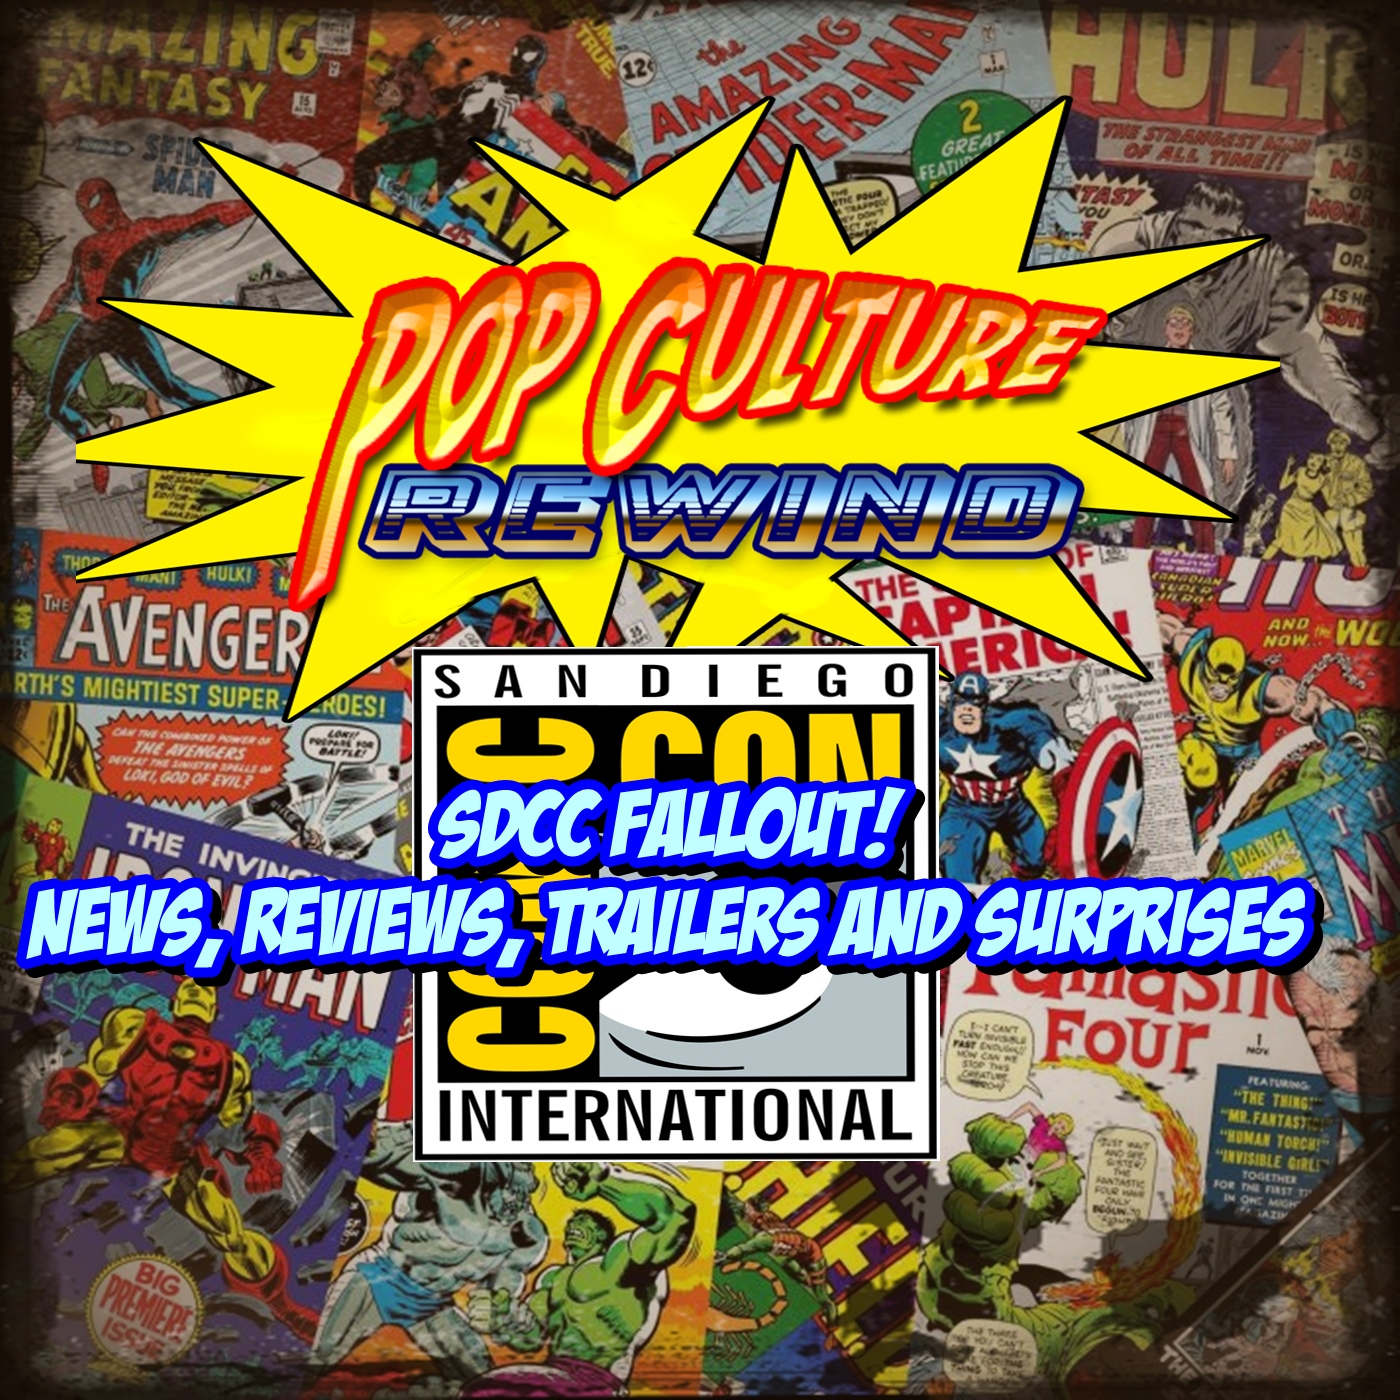 PCR #93: SDCC Fallout! News, Reviews, Trailers & More